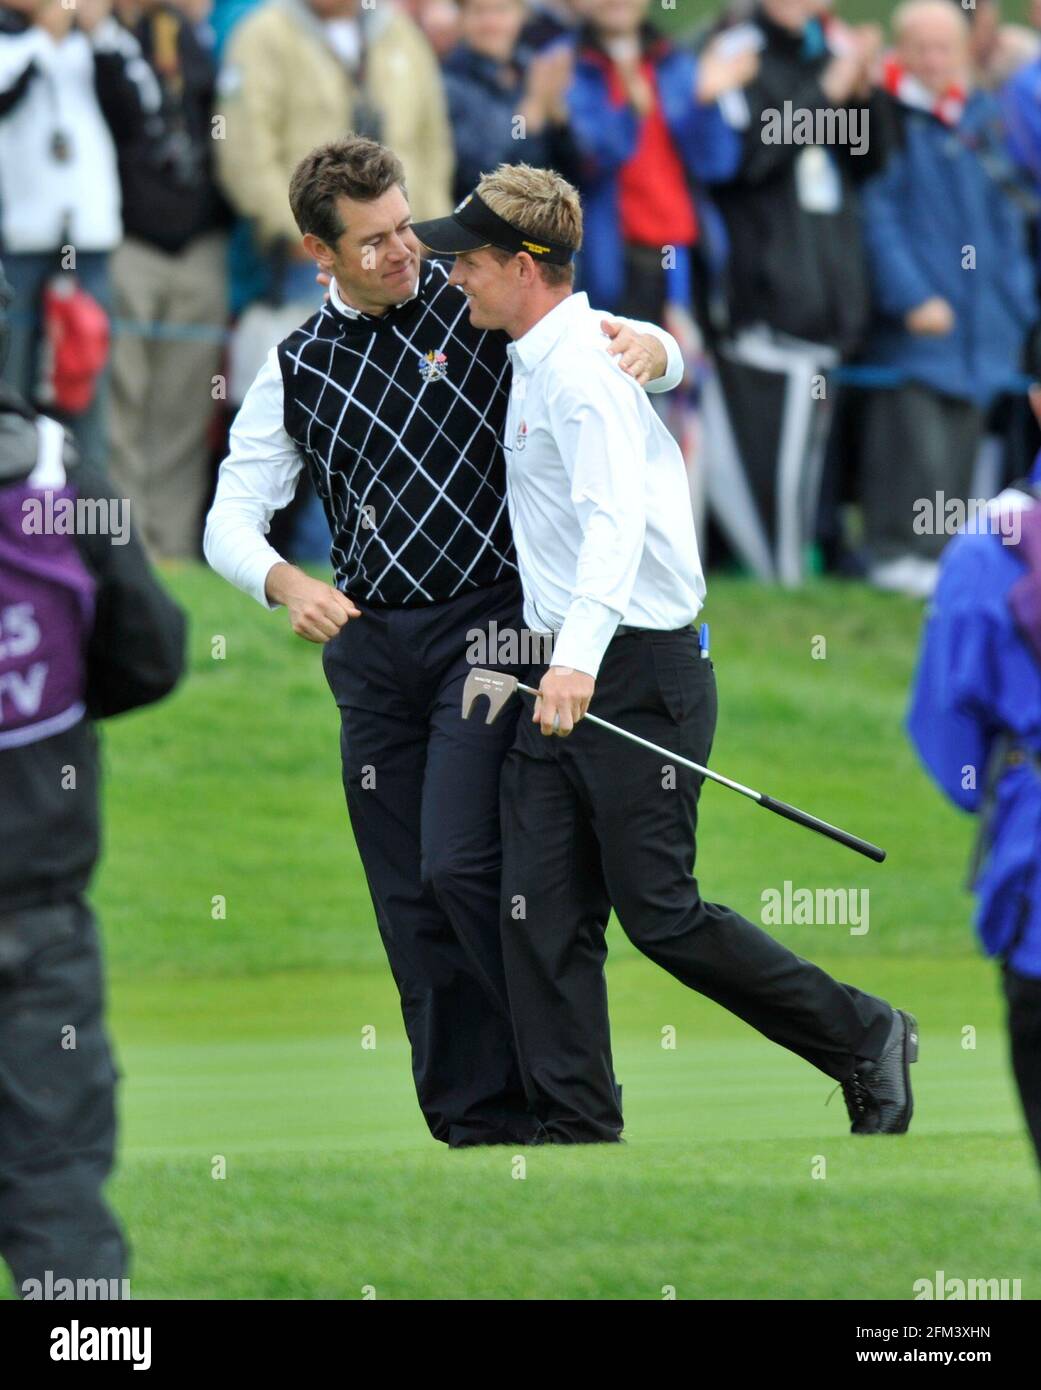 2010 38TH RYDER CUP AT CELTIC MANOR RESORT WALES. 3/10/2010, 3rd DAY FOURSOMES.DONNALD AND WESTWOOD BEAT WOODS AND STRICKER ON THE 13TH.  PICTURE DAVID ASHDOWN Stock Photo